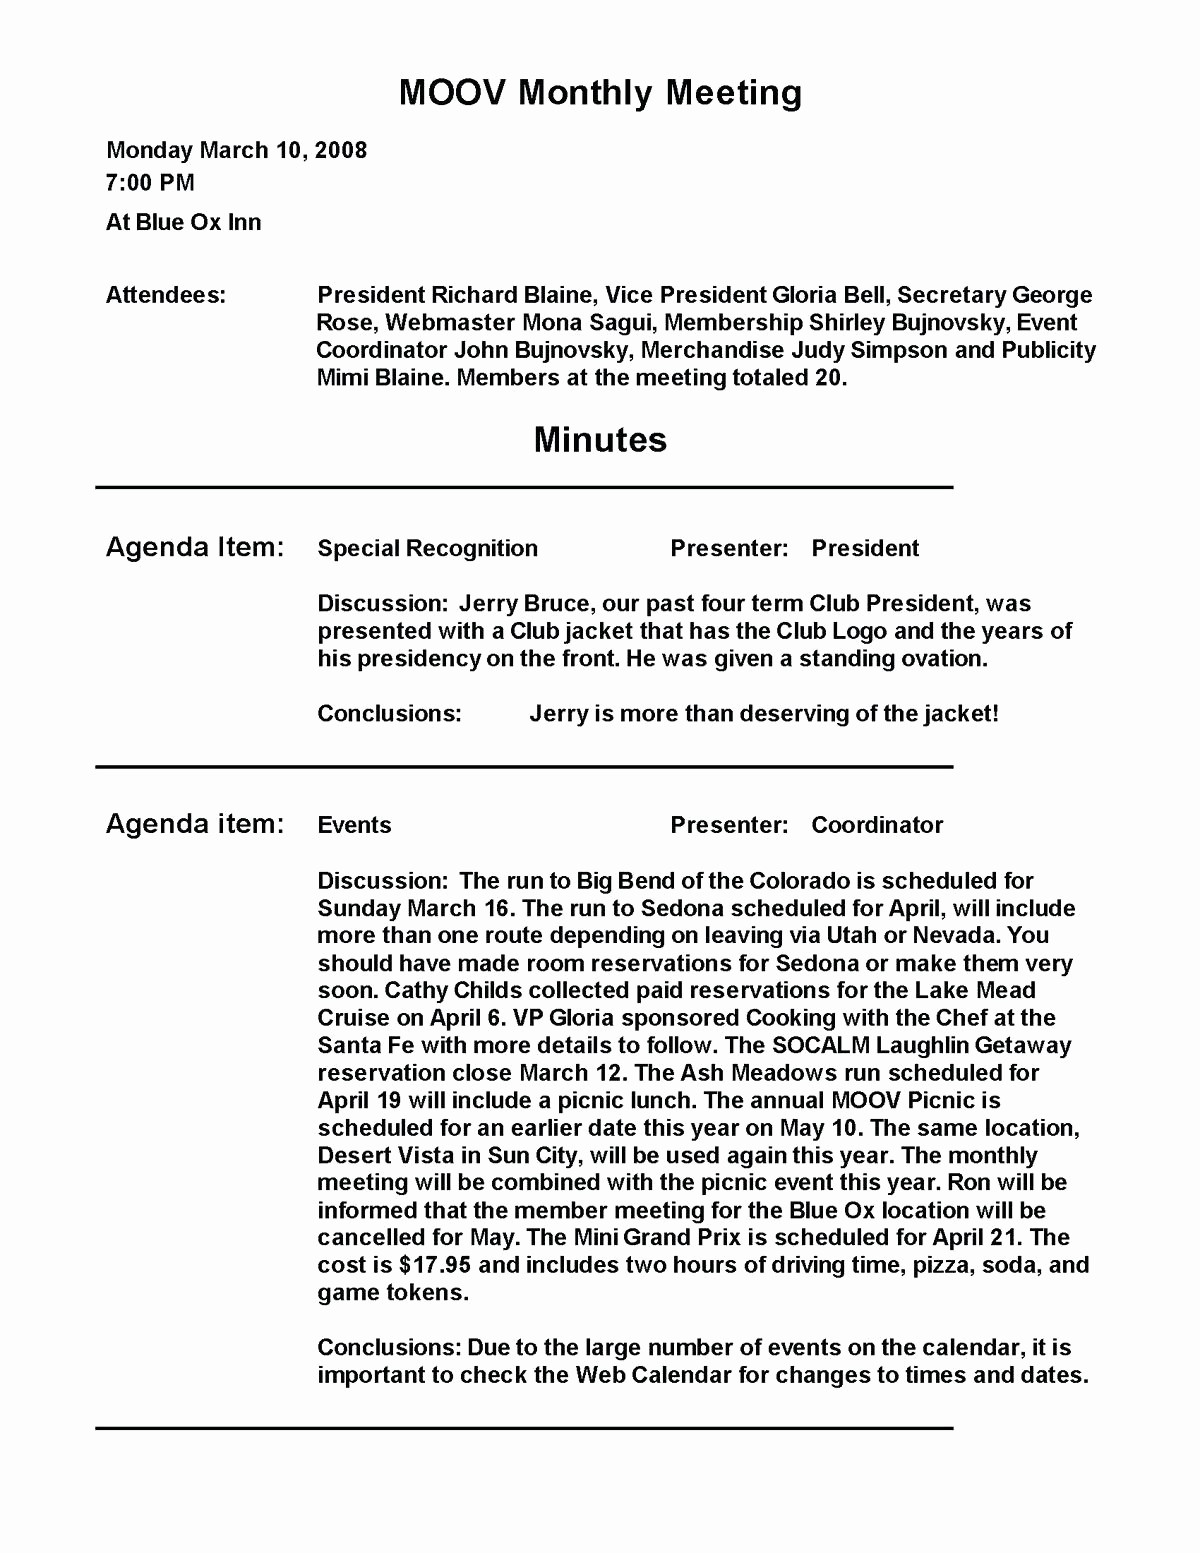 Minutes Of the Meeting Template Awesome Template Word Meeting Minutes Template